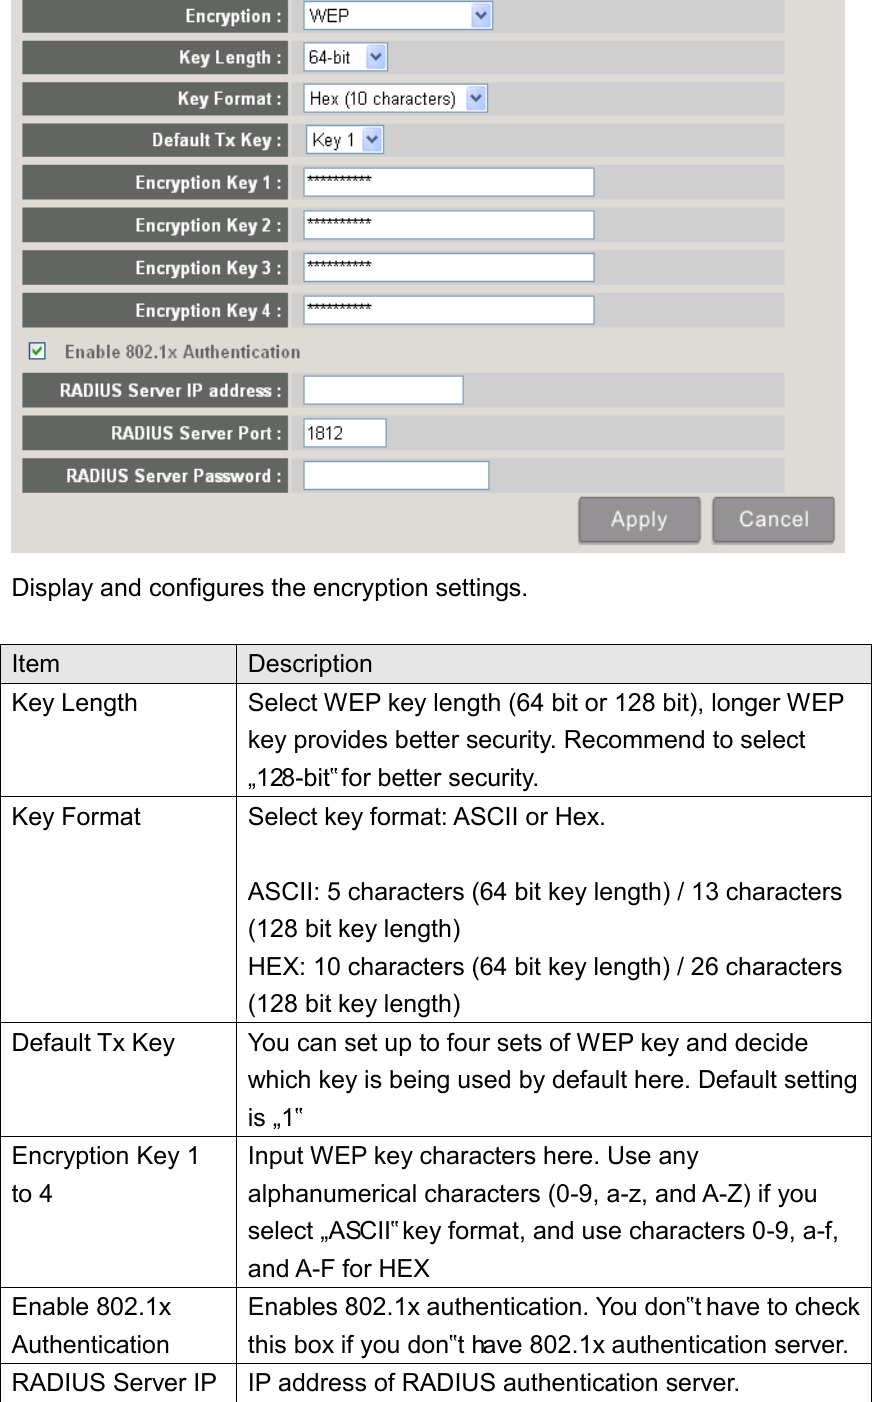  Display and configures the encryption settings.  Item Description Key Length Select WEP key length (64 bit or 128 bit), longer WEP key provides better security. Recommend to select „128-bit‟ for better security. Key Format Select key format: ASCII or Hex.  ASCII: 5 characters (64 bit key length) / 13 characters (128 bit key length) HEX: 10 characters (64 bit key length) / 26 characters (128 bit key length) Default Tx Key You can set up to four sets of WEP key and decide which key is being used by default here. Default setting is „1‟ Encryption Key 1 to 4 Input WEP key characters here. Use any alphanumerical characters (0-9, a-z, and A-Z) if you select „ASCII‟ key format, and use characters 0-9, a-f, and A-F for HEX Enable 802.1x Authentication Enables 802.1x authentication. You don‟t have to check this box if you don‟t have 802.1x authentication server. RADIUS Server IP IP address of RADIUS authentication server. 